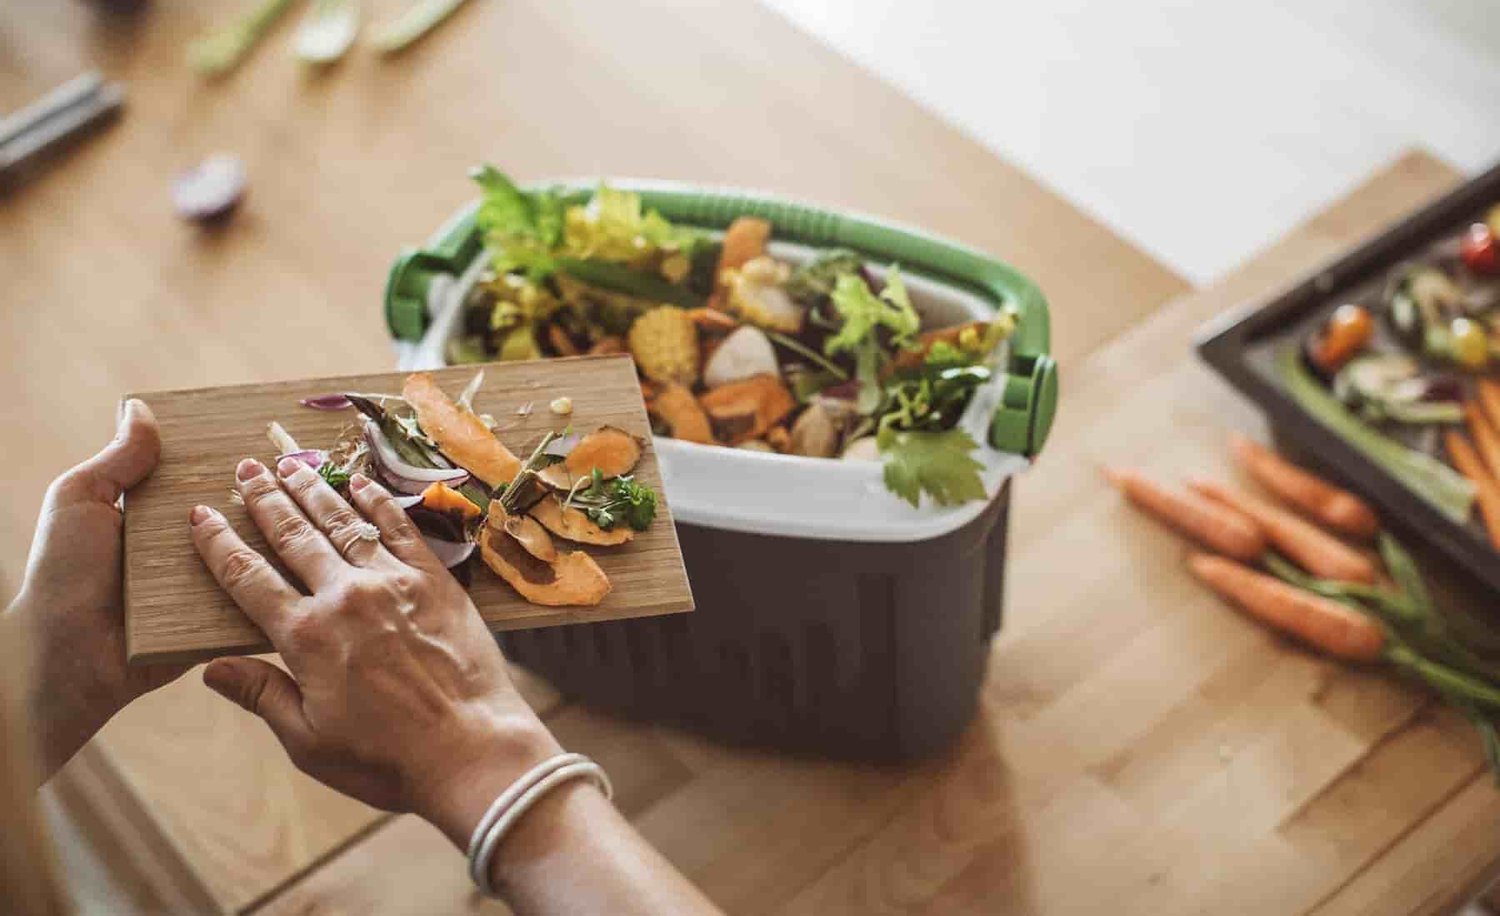 How to compost at home: The complete guide for indoor and outdoor composting